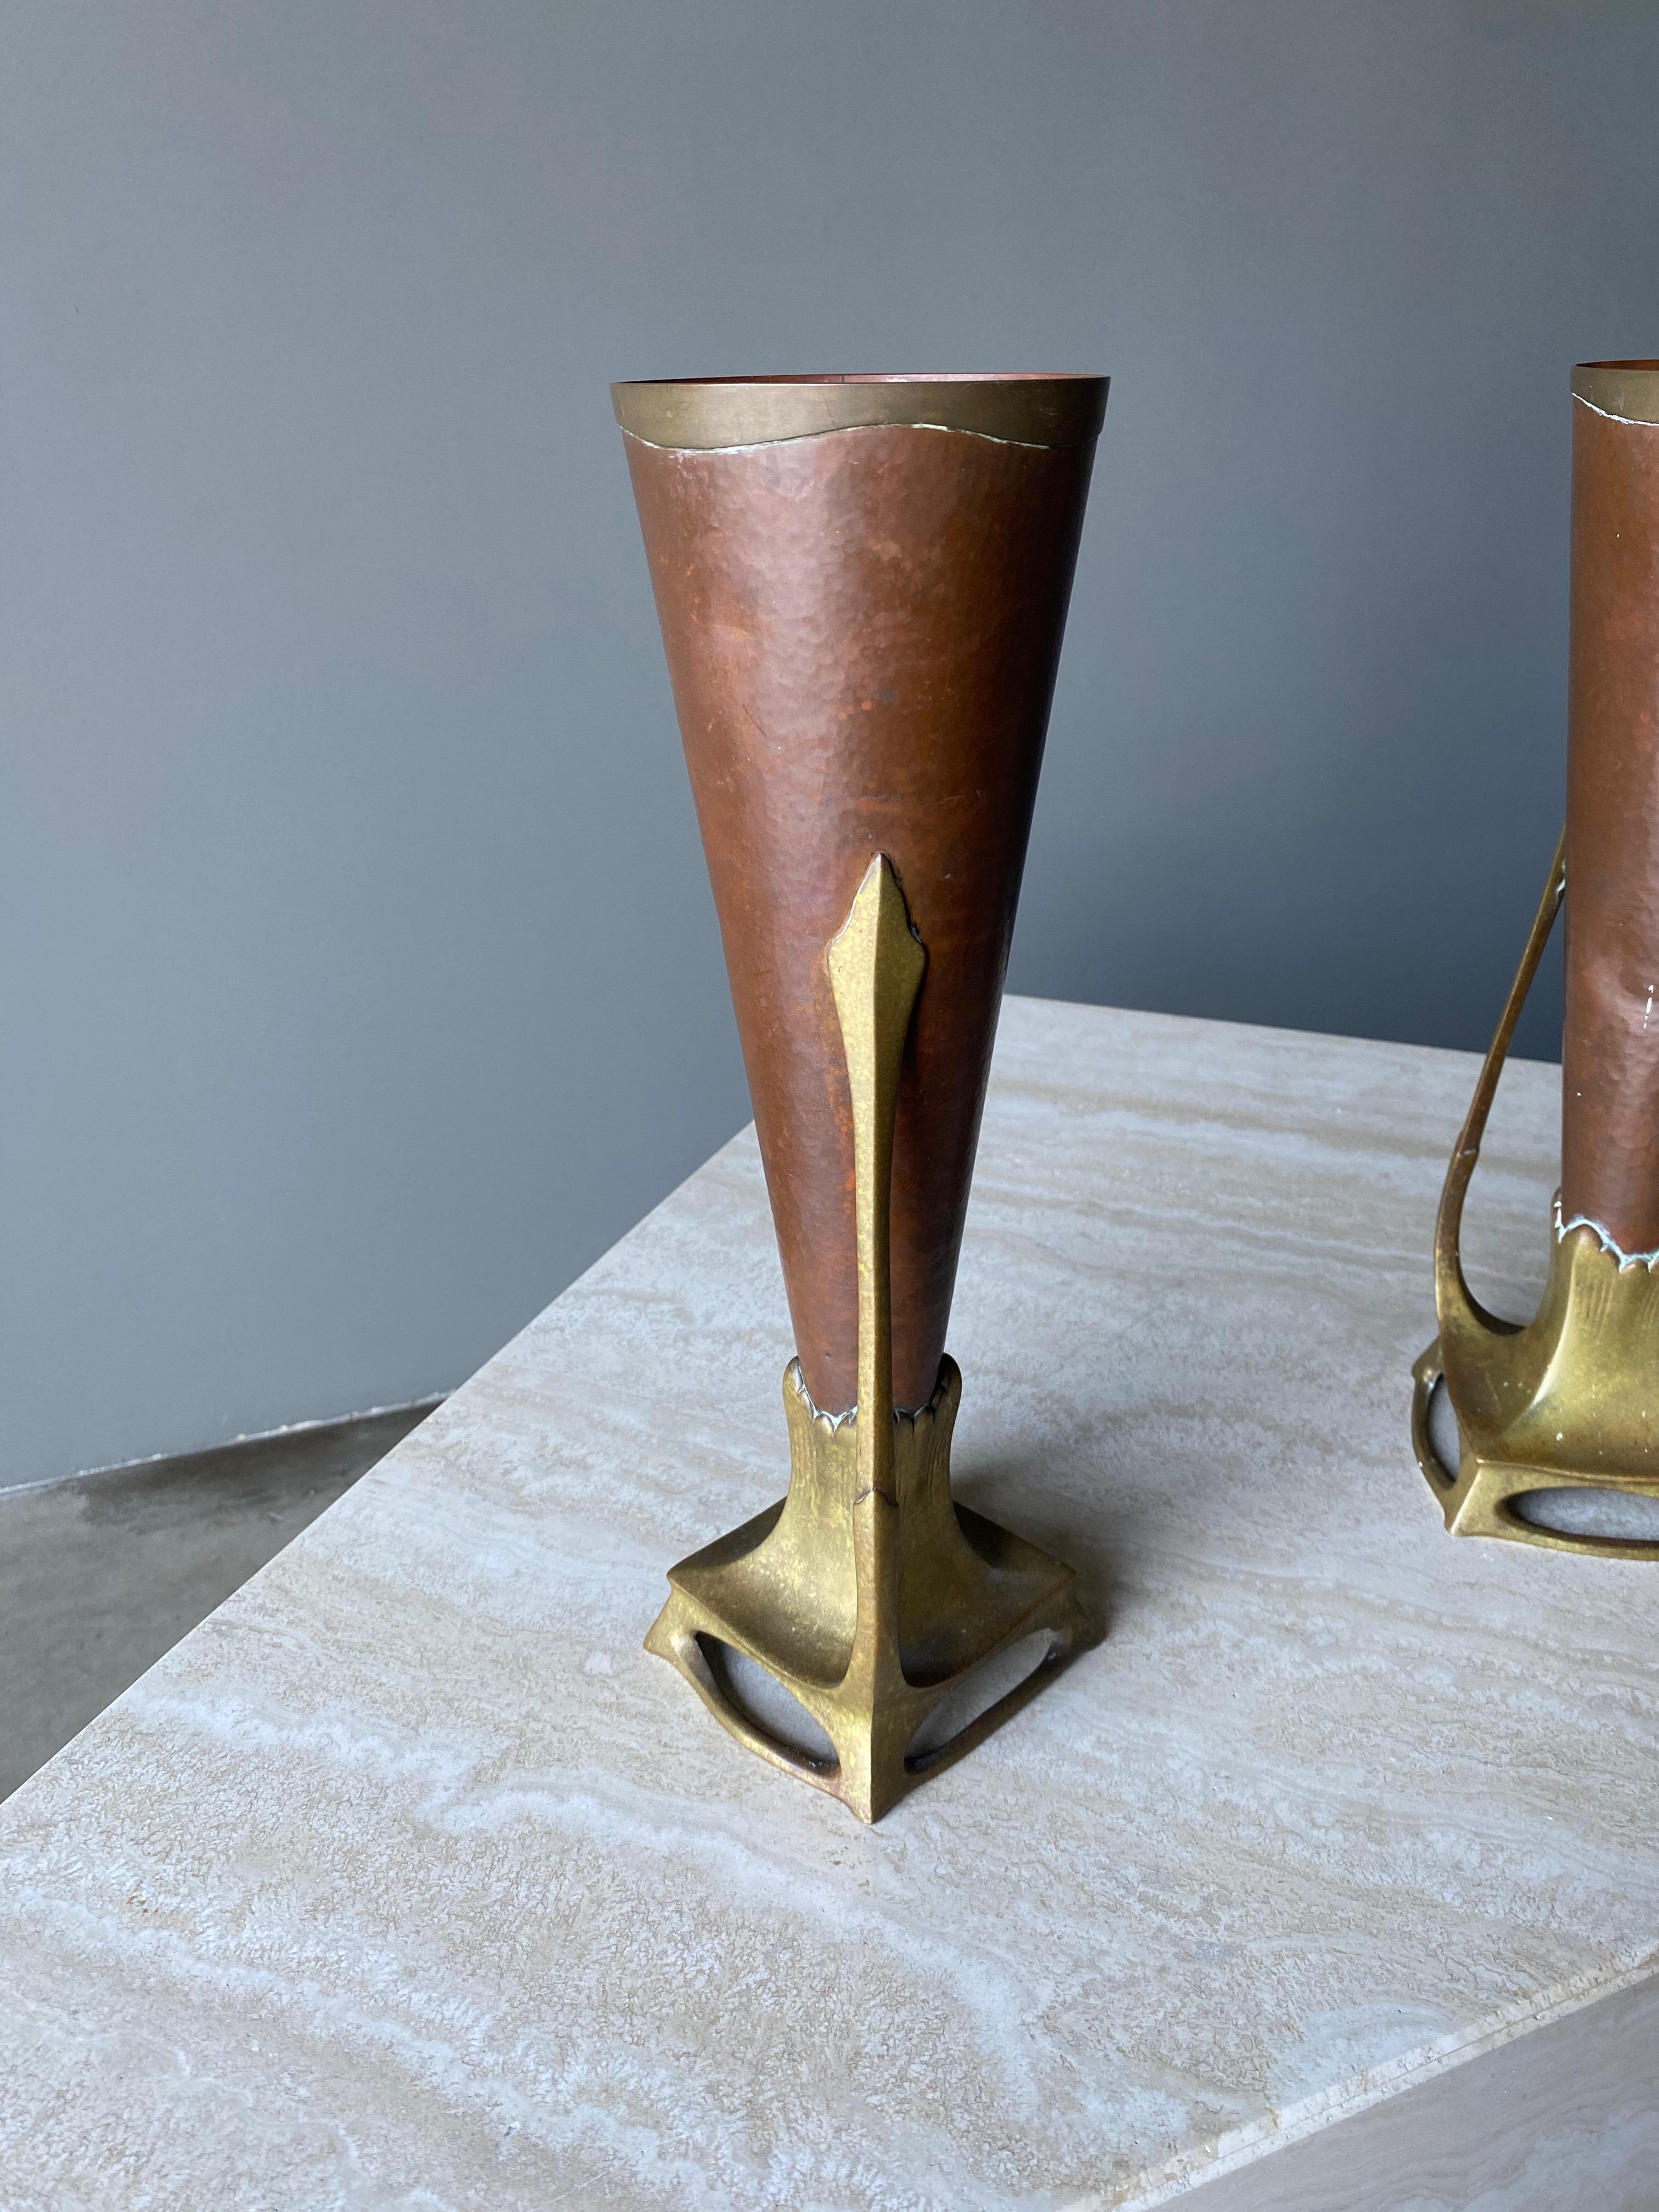 Carl Deffner Pair of Hammered Copper & Cast Bronze Vases, Germany, circa 1900 For Sale 1